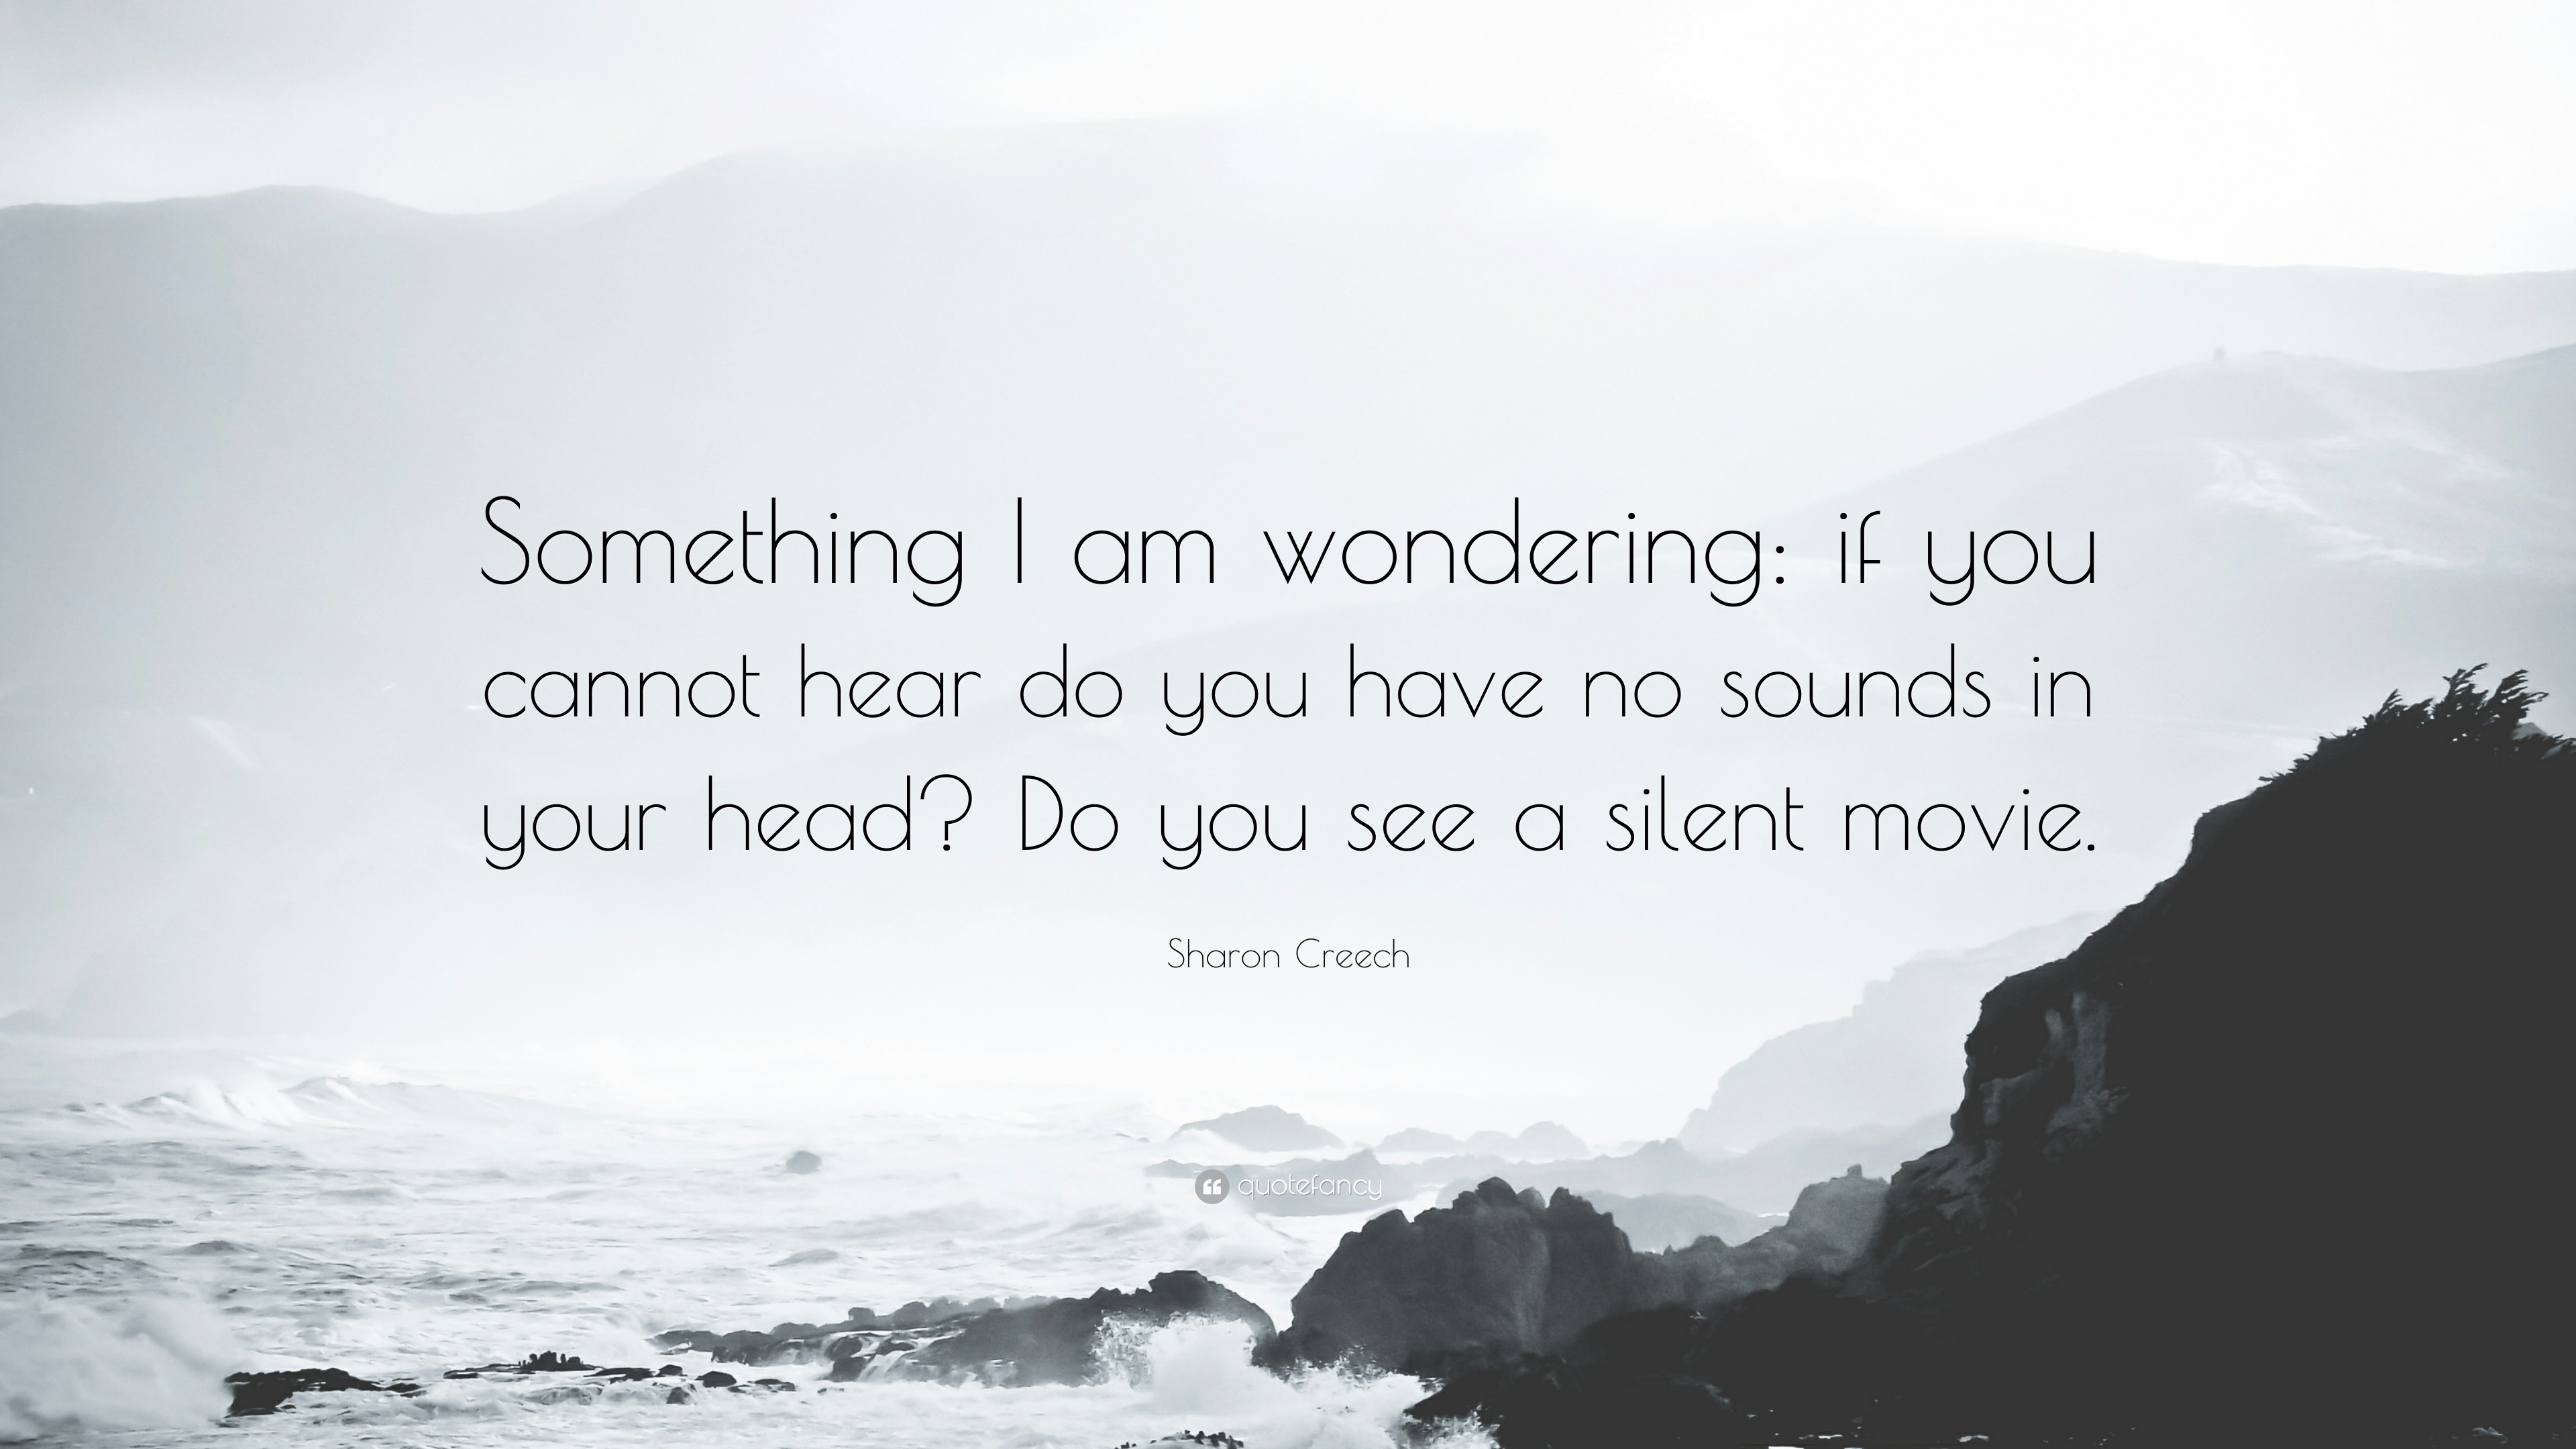 Sharon Creech Quote Something I Am Wondering If You Cannot Hear Do You Have No Sounds